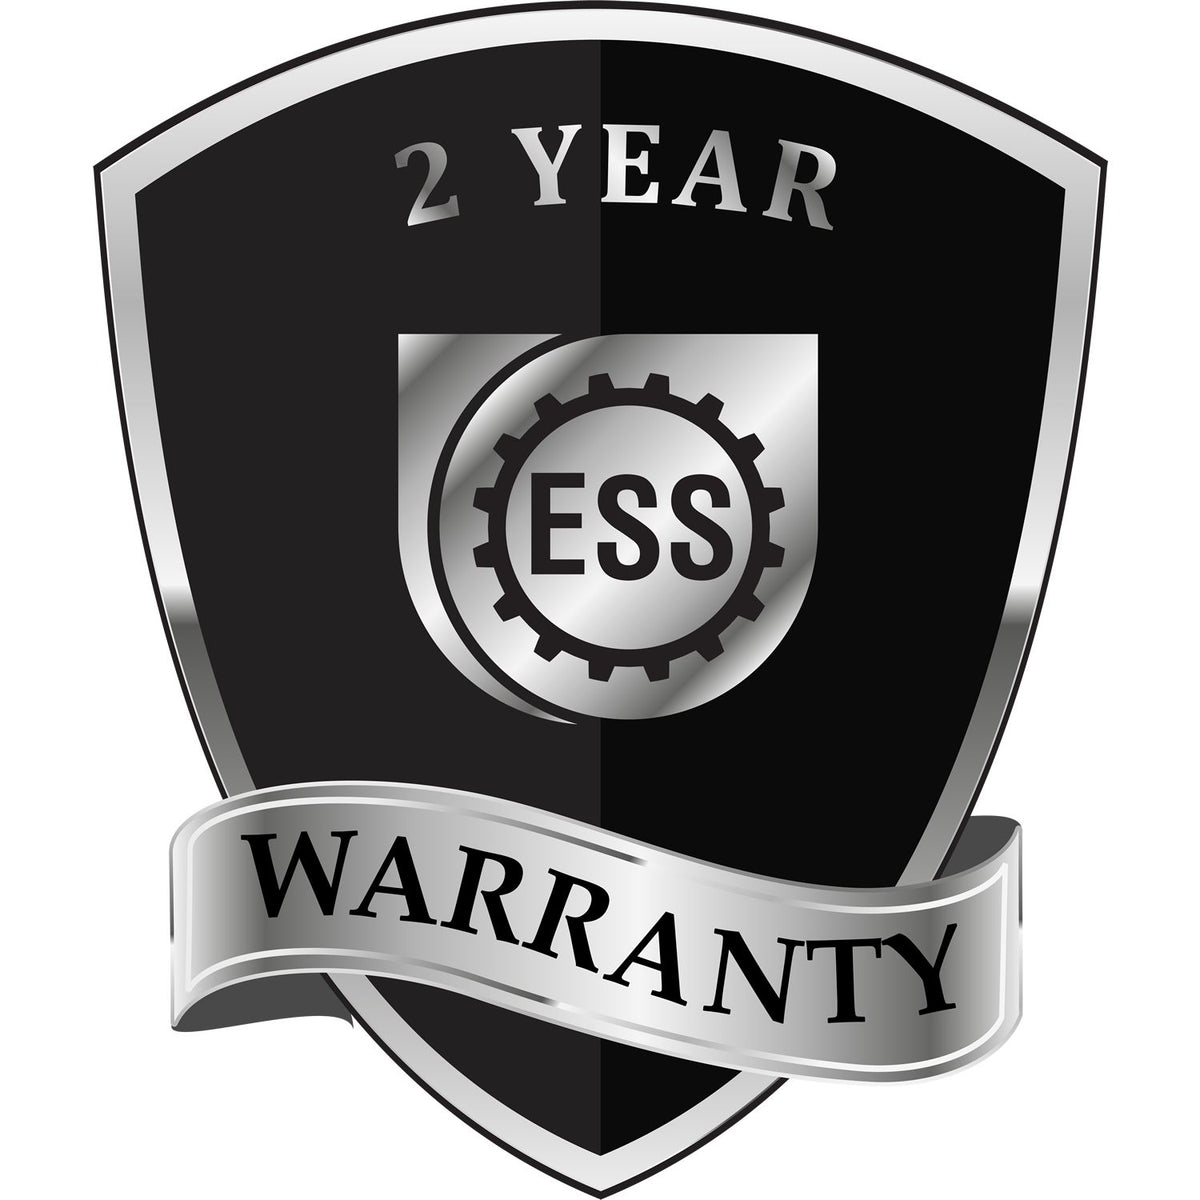 A black and silver badge or emblem showing warranty information for the Gift Georgia Land Surveyor Seal